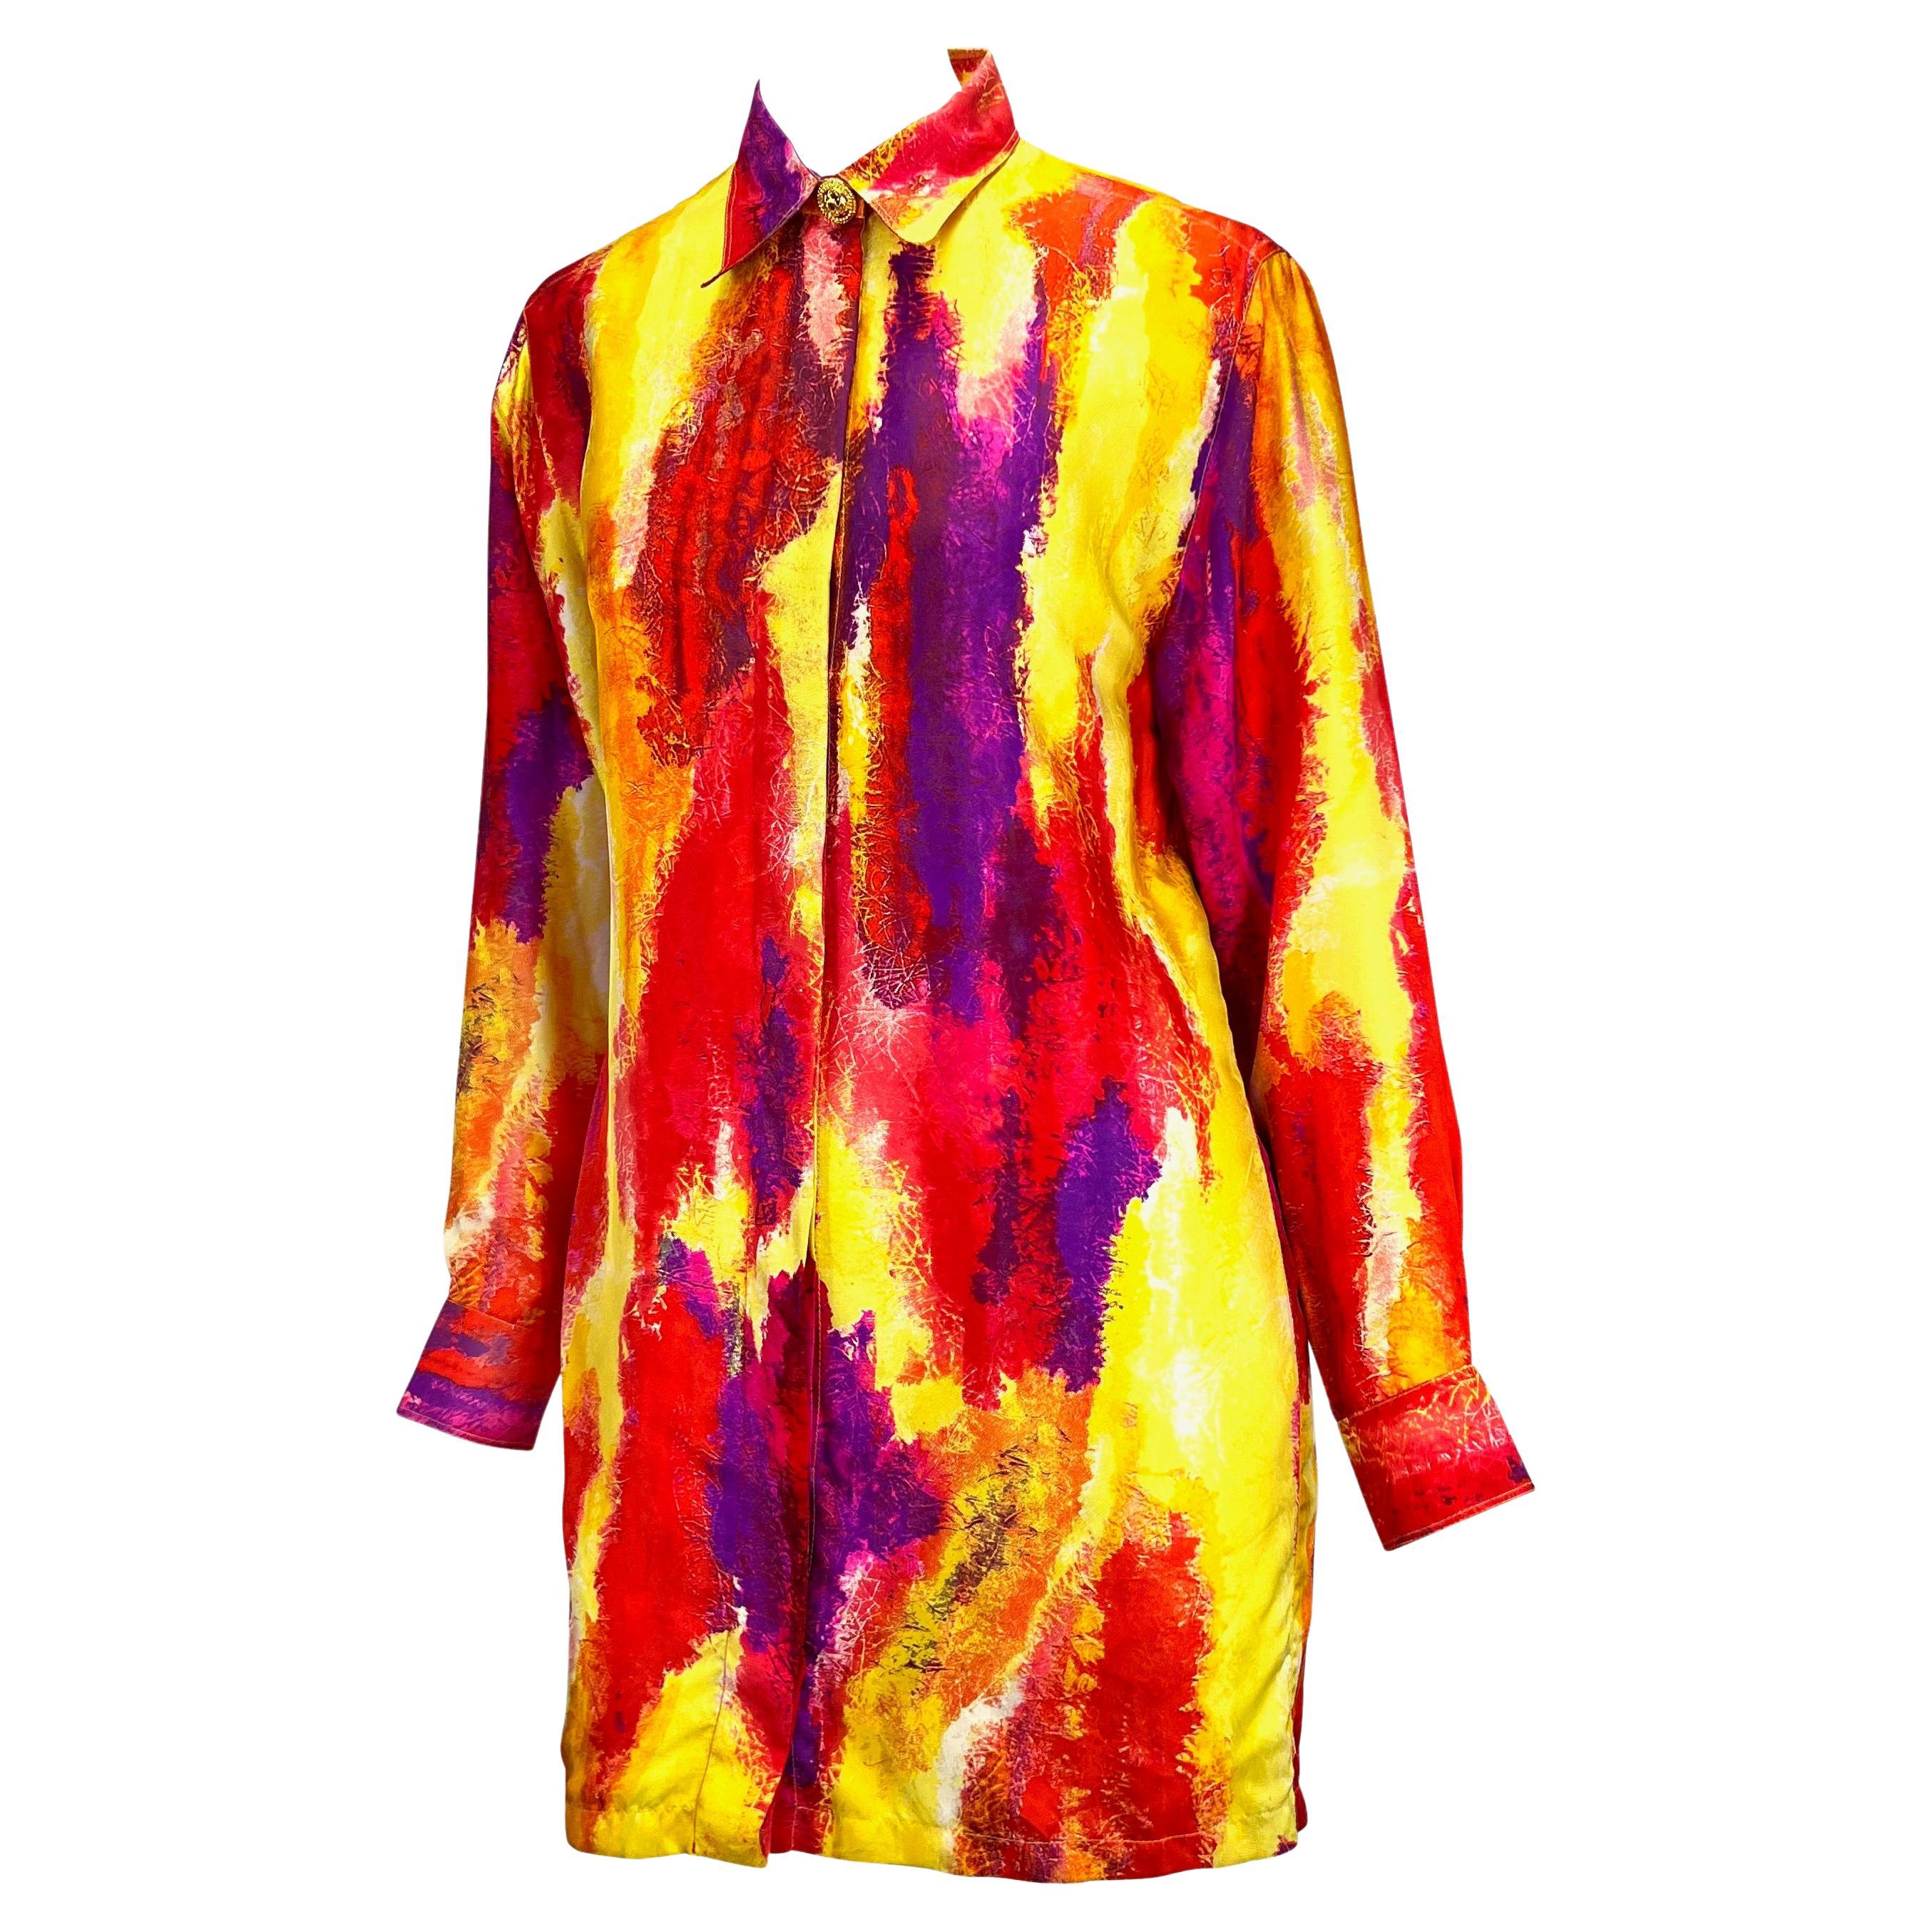 Presenting a vibrant watercolor Gianni Versace Couture dress, designed by Gianni Versace. From the Spring/Summer 1994 collection, this dress rare sample features a bright abstract print that is reminiscent of watercolor brush strokes. Made complete